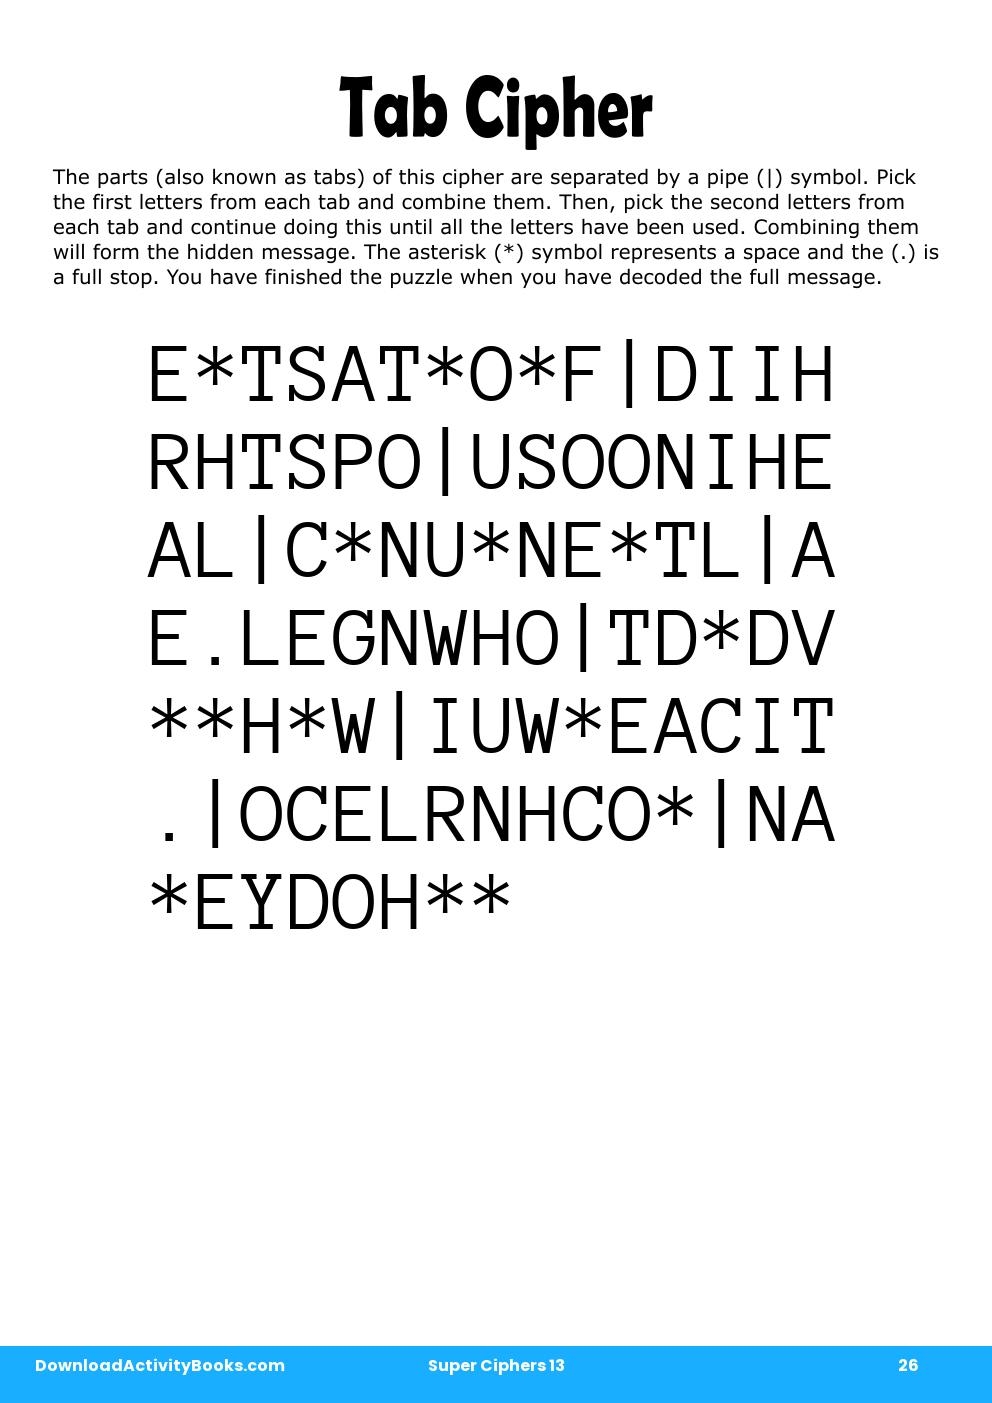 Tab Cipher in Super Ciphers 13